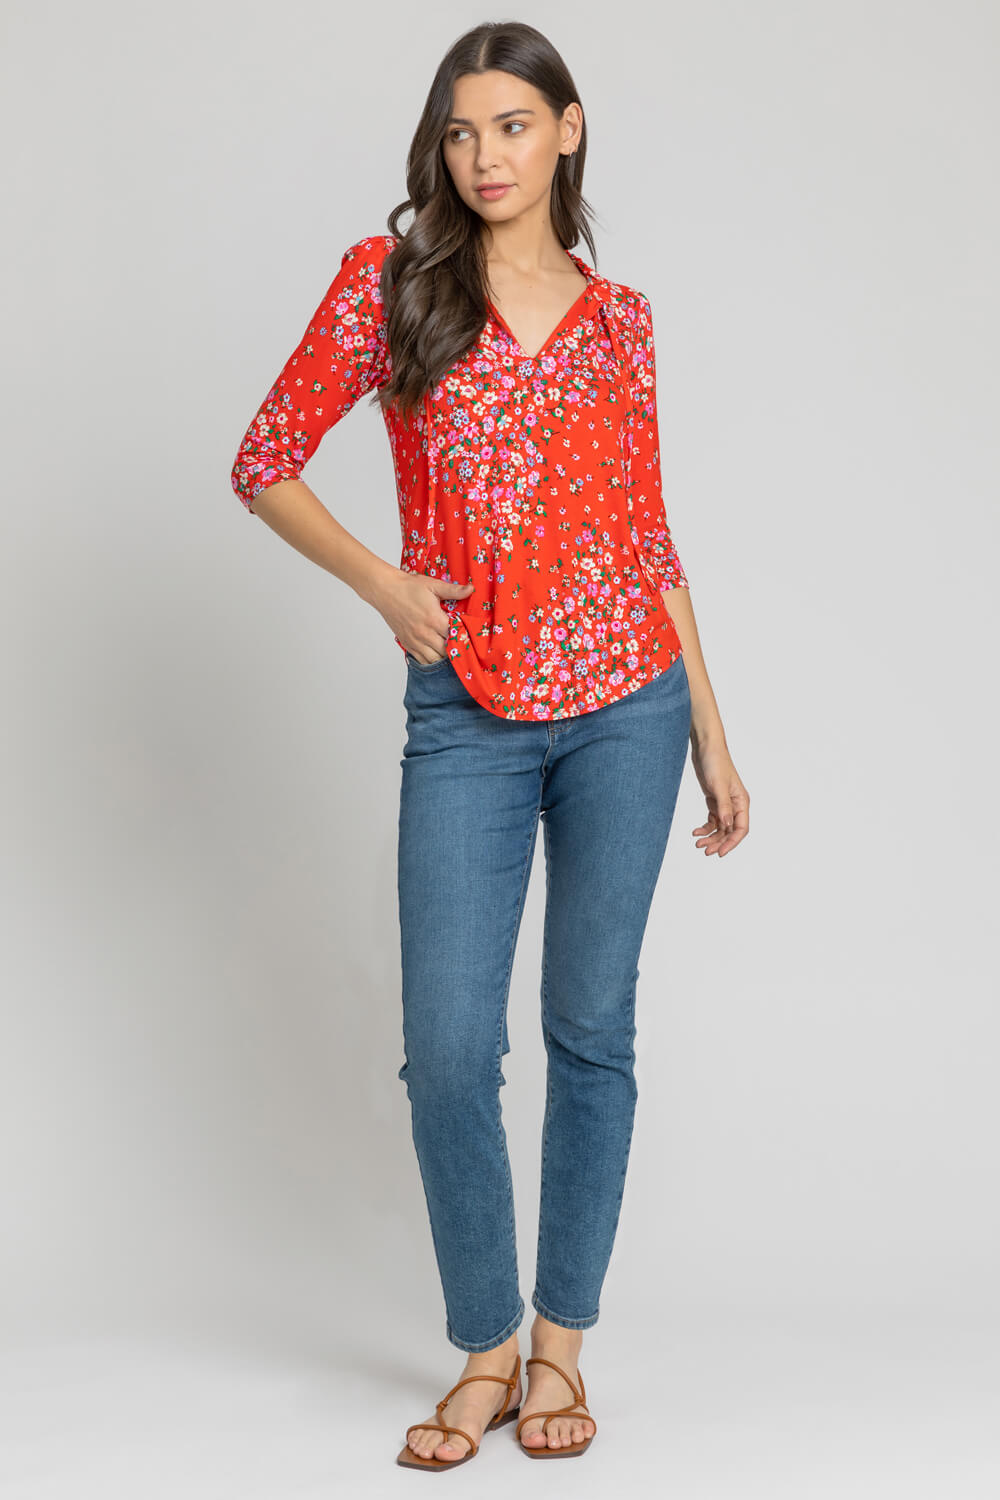 Red Floral Tie Neck Detail Top, Image 3 of 4